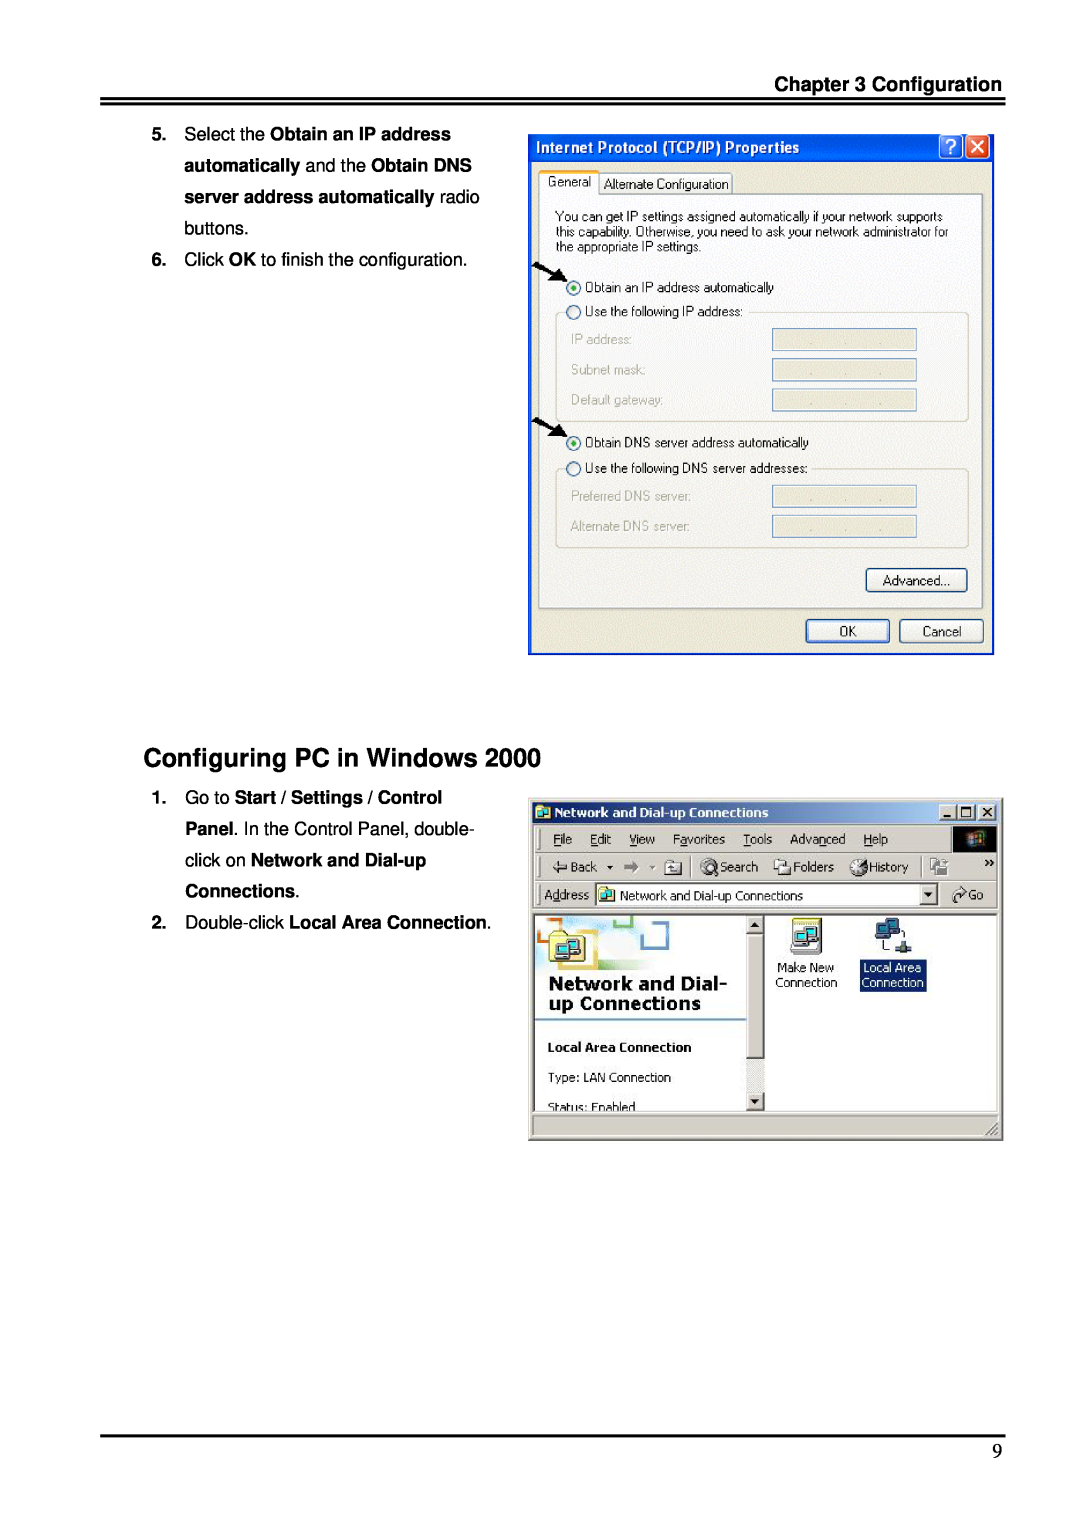 Billion Electric Company 7100SV manual Configuring PC in Windows, Configuration, Double-click Local Area Connection 